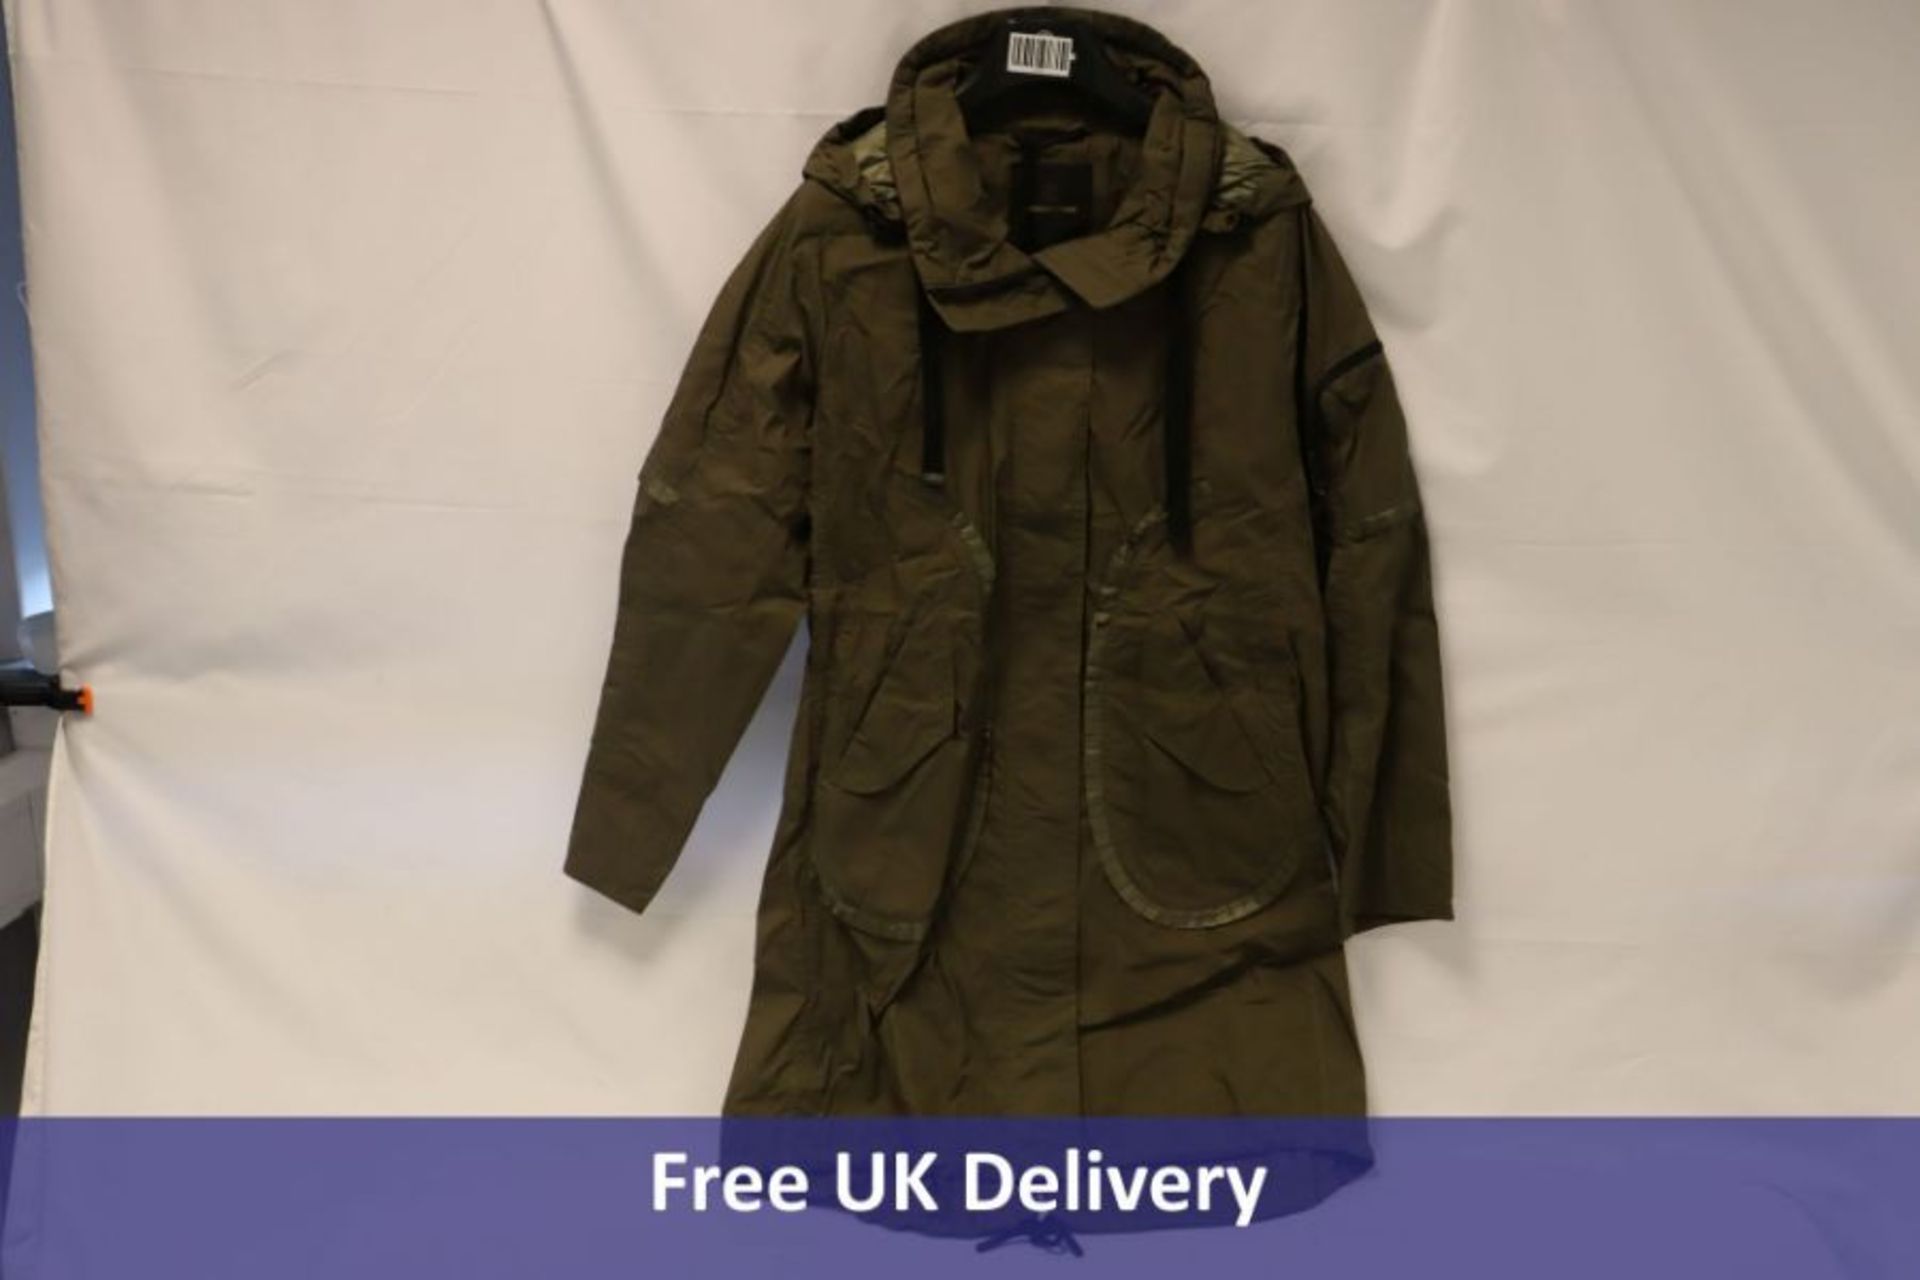 Creenstone Waxed Cotton Parka, Summer Army, Size 34